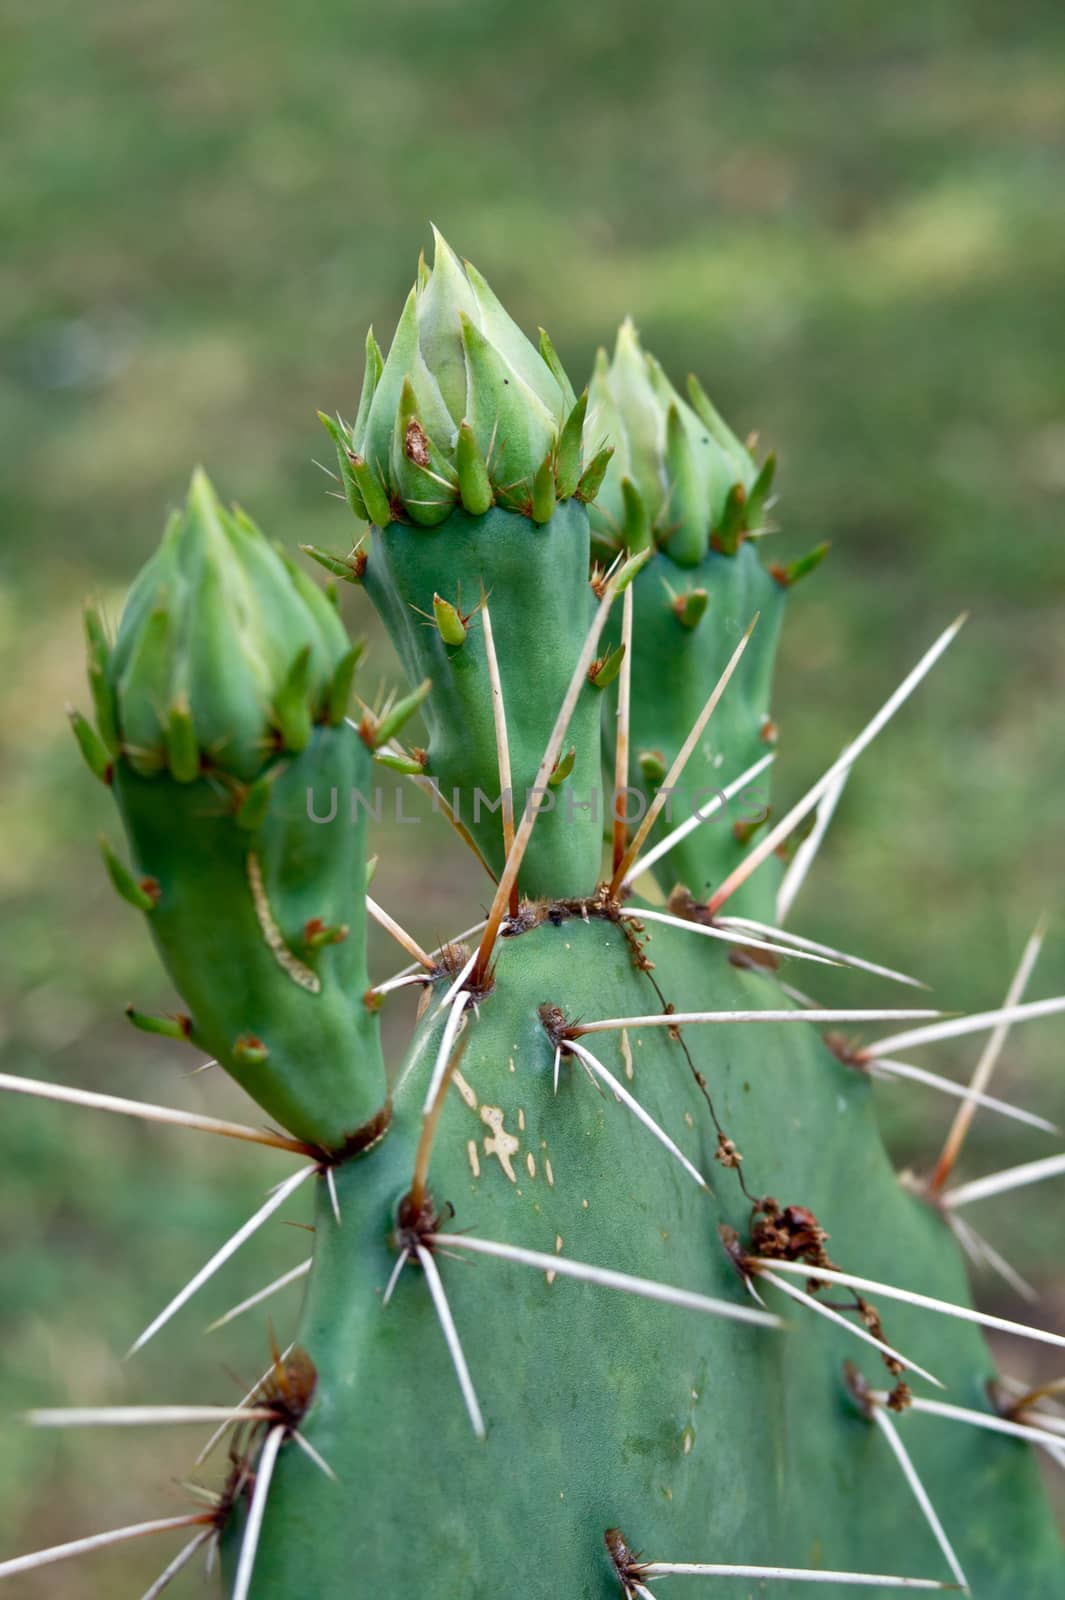 Prickly pear (Opuntia) buds in the garden